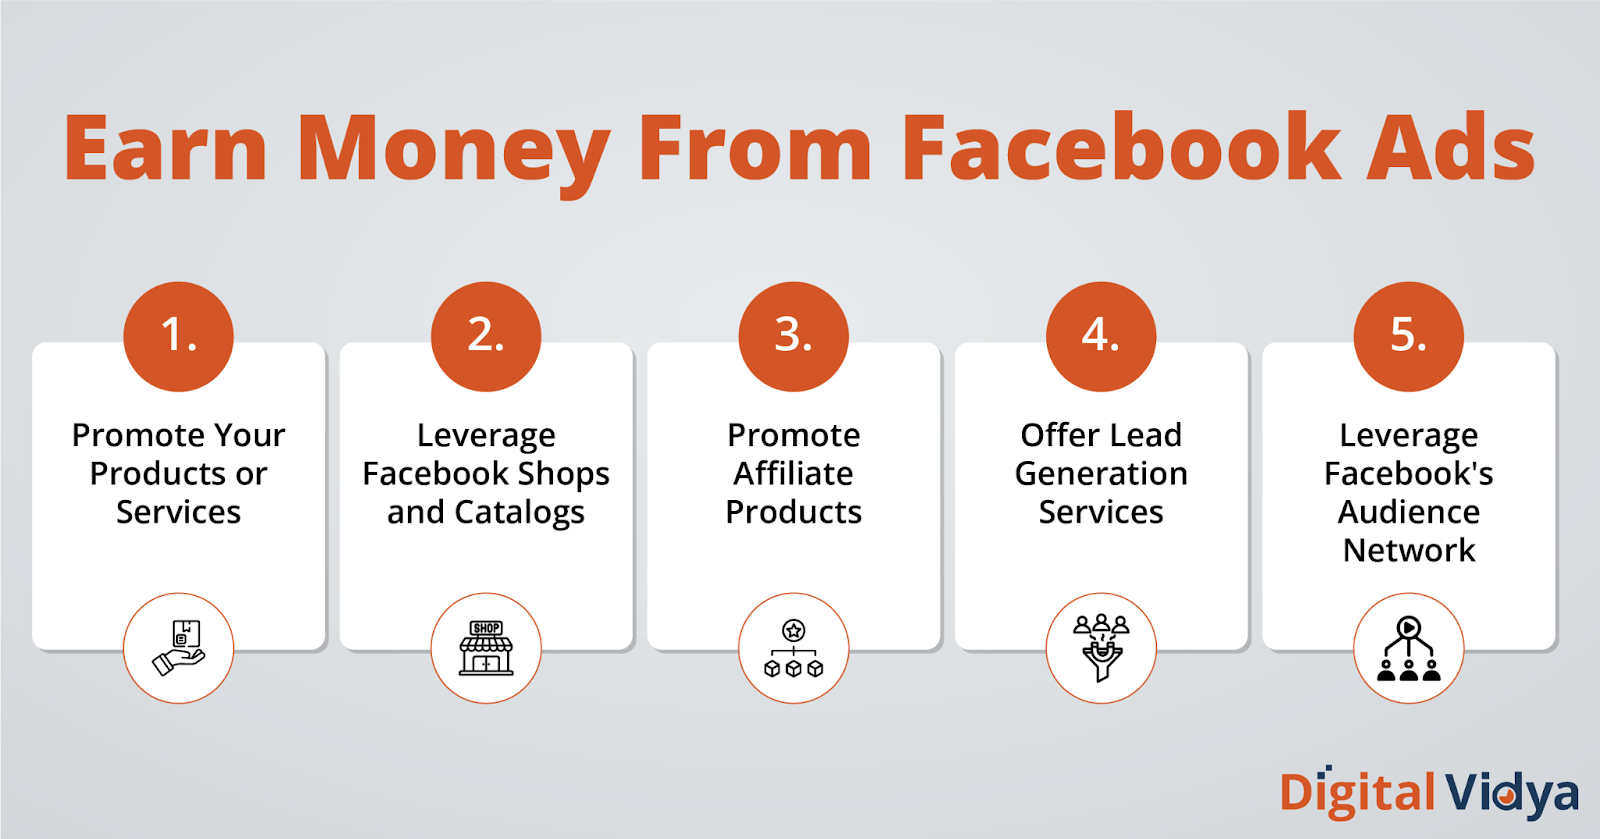  Infographic illustrating five methods to monetize through Facebook Advertising - promoting products/services, leveraging shops and catalogs, promoting affiliate products, offering lead generation services, and utilizing Facebook's audience network.